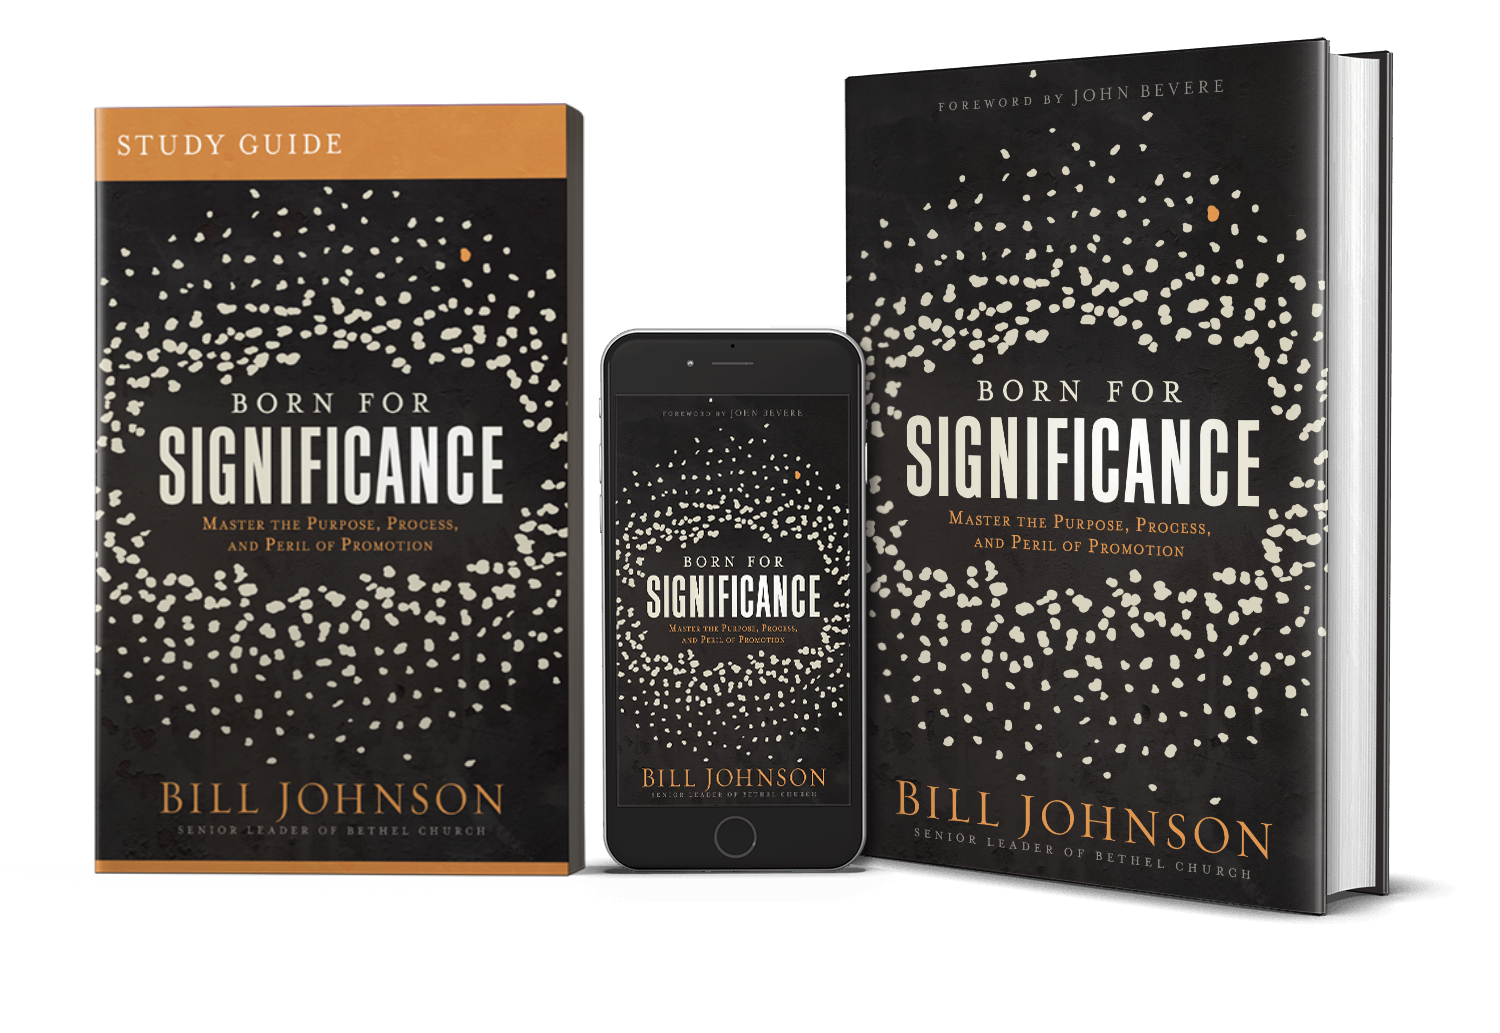 other books by bill johnson